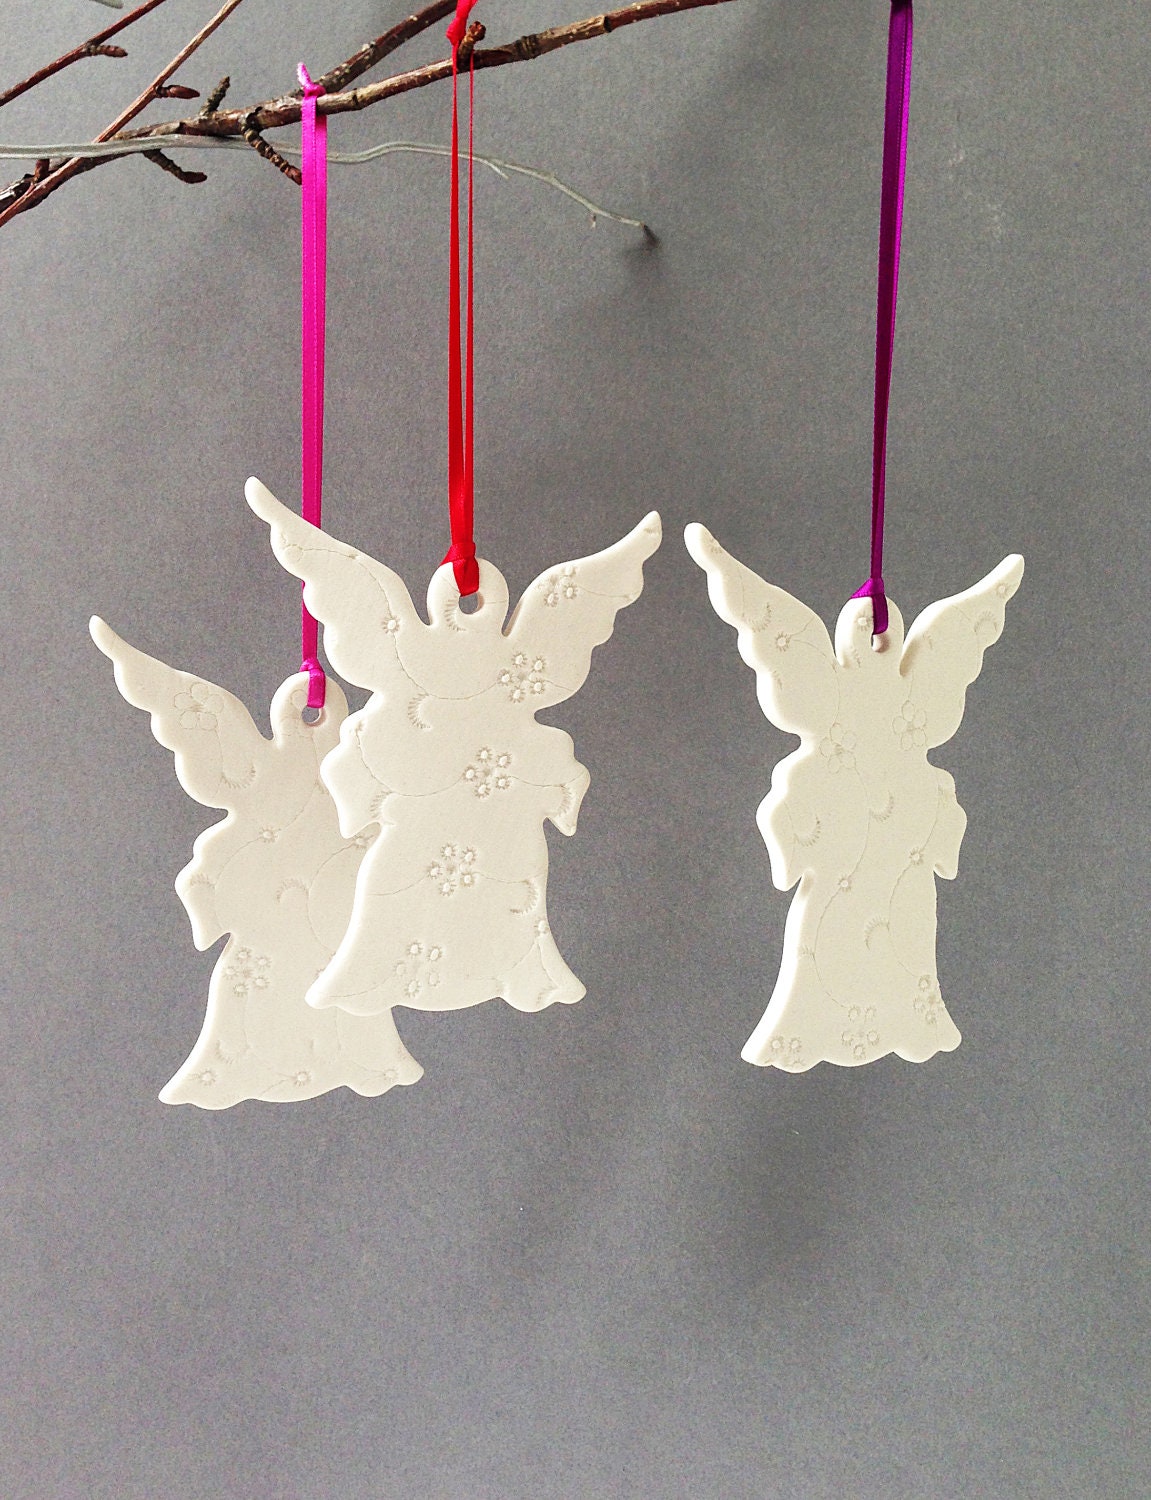 3 Large Christmas Angel Ornaments - Three White Porcelain Christmas Snow Angels Ornaments Modern Holiday ornaments - PrinceDesignUK